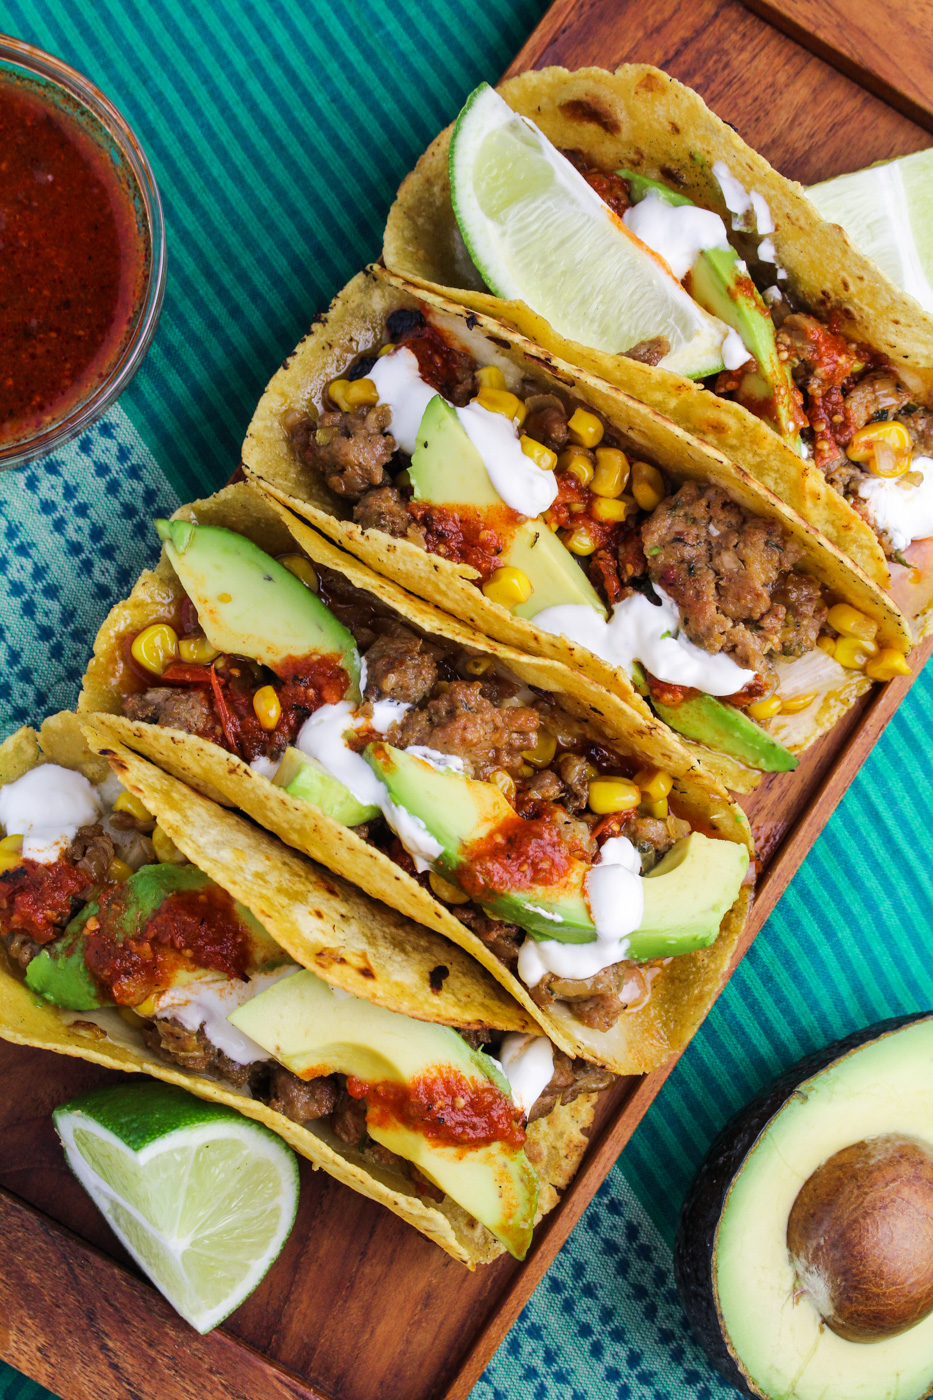 Corn and Chorizo Tacos with Avocado, Cheddar, Sour Cream and Salsa {Katie at the Kitchen Door}